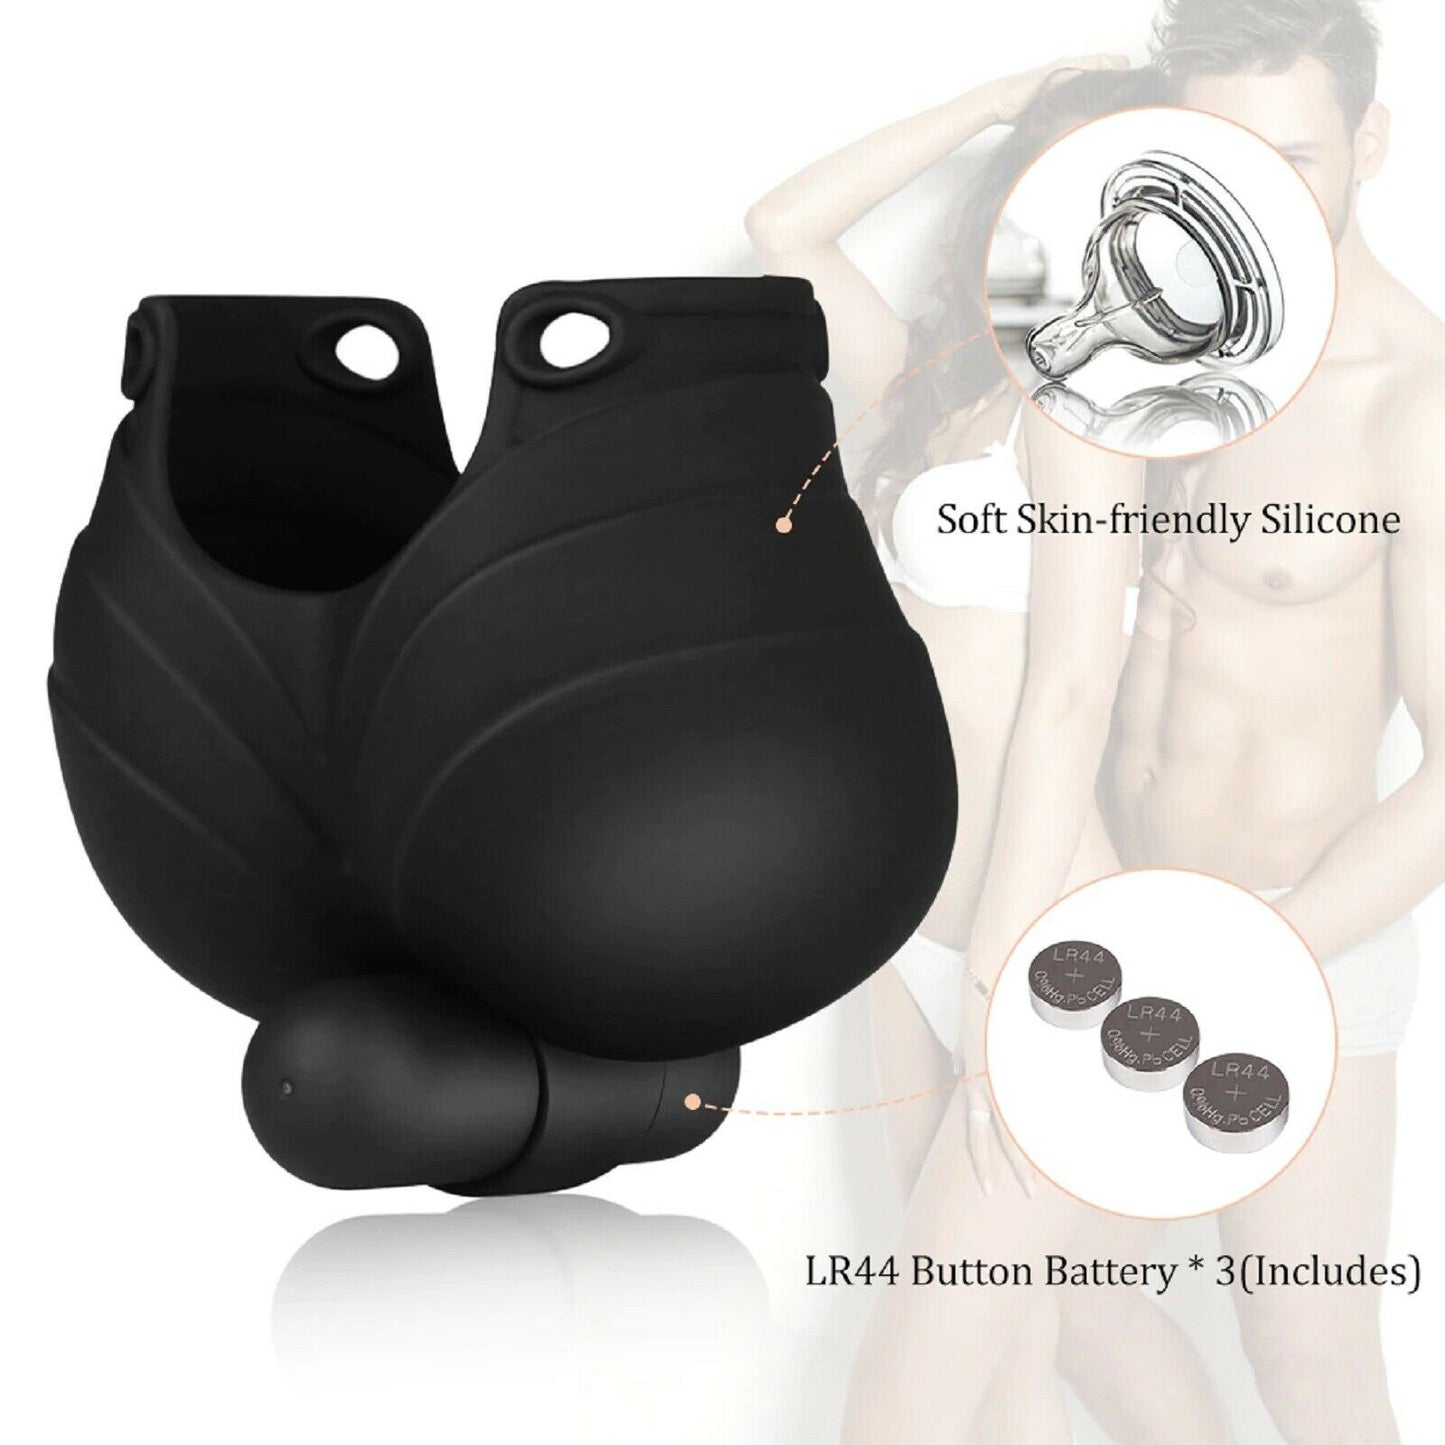 Vibrating Cock Ring Ball Scrotum Stretcher Chastity Couples Vibrator Sex Toy NEW